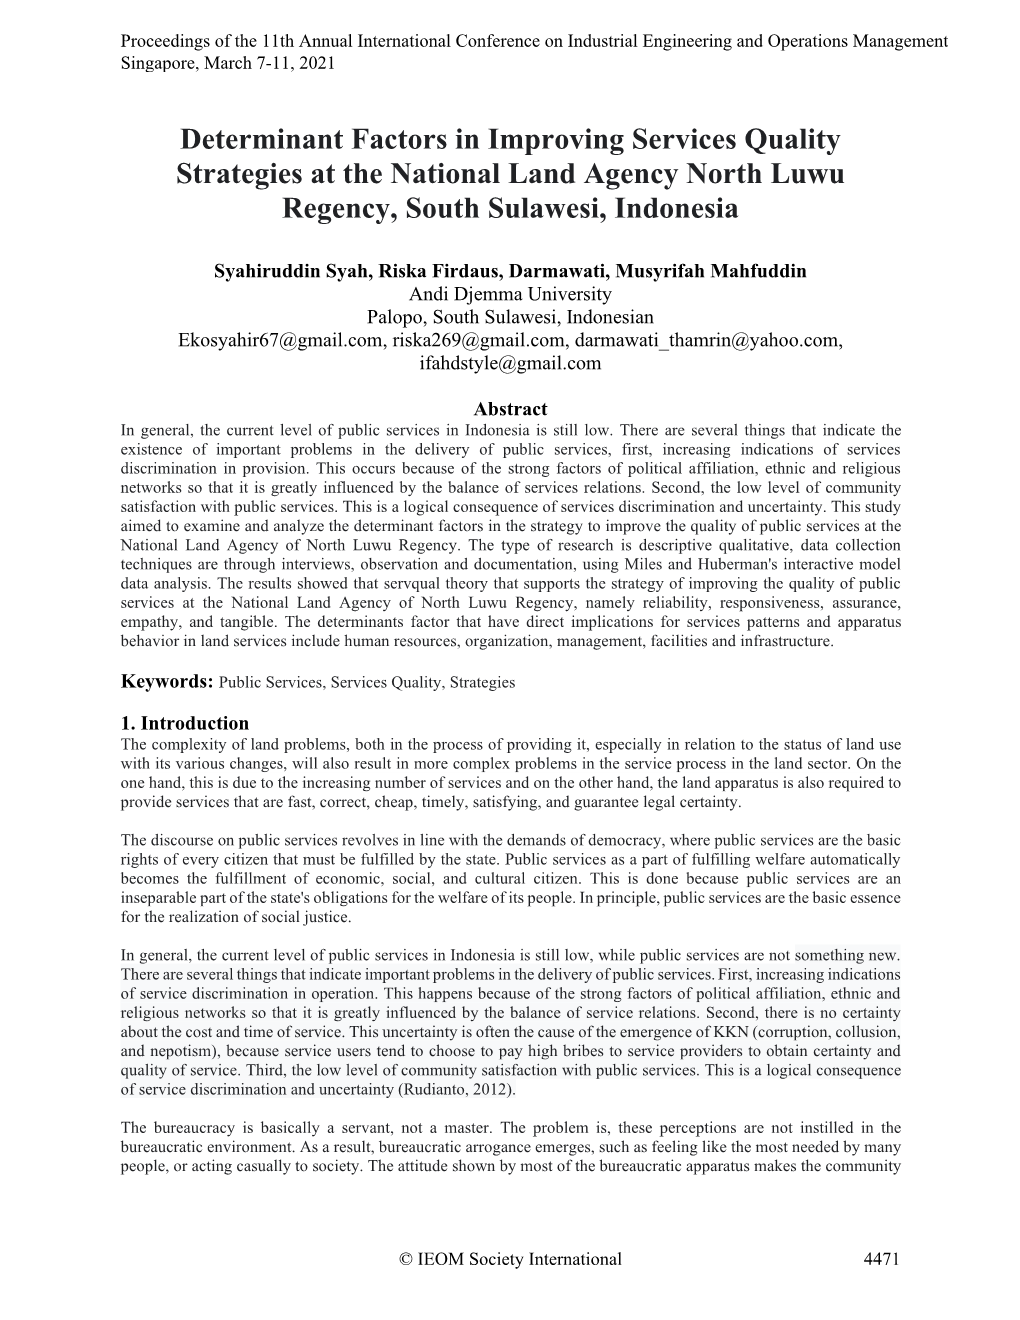 Determinant Factors in Improving Services Quality Strategies at the National Land Agency North Luwu Regency, South Sulawesi, Indonesia